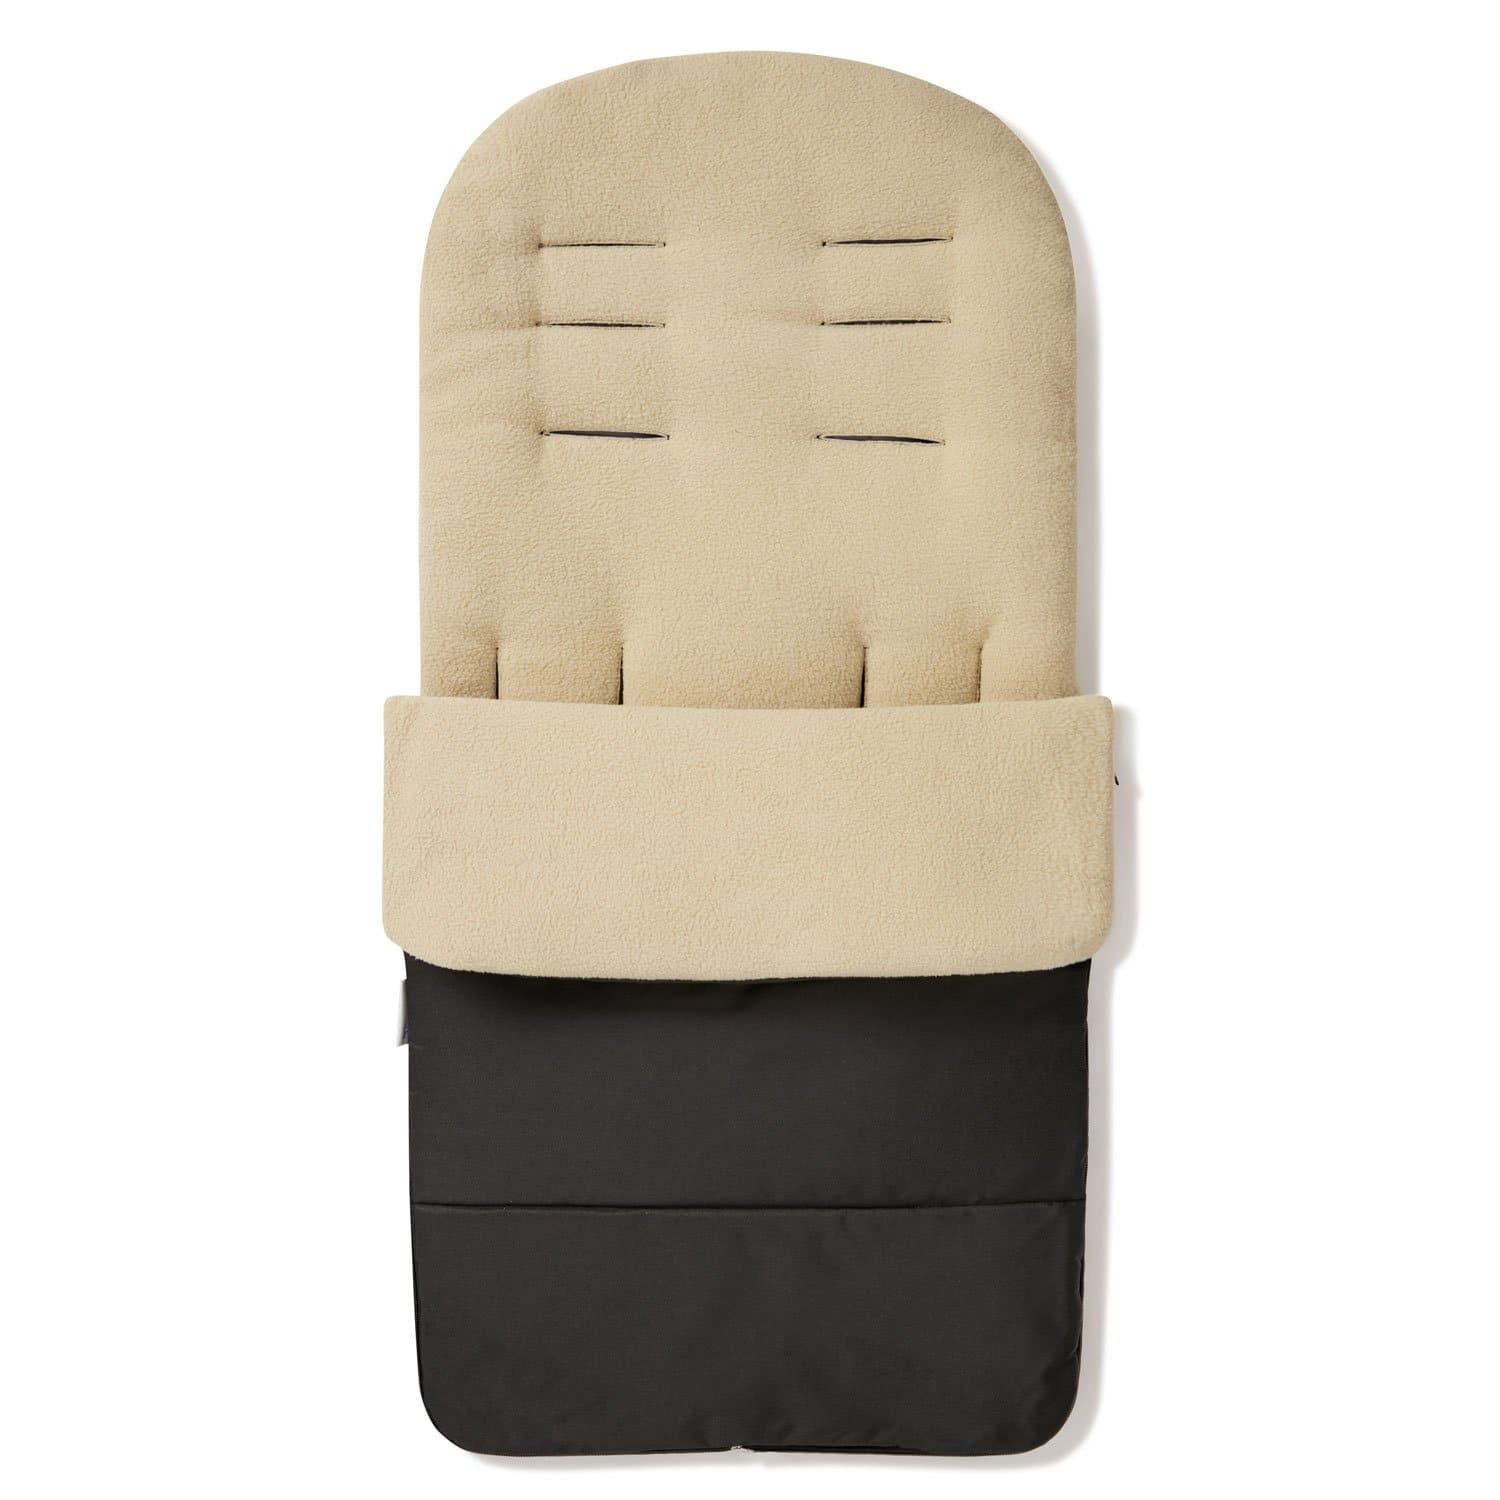 Premium Footmuff / Cosy Toes Compatible with BOB - Desert Sand / Fits All Models | For Your Little One